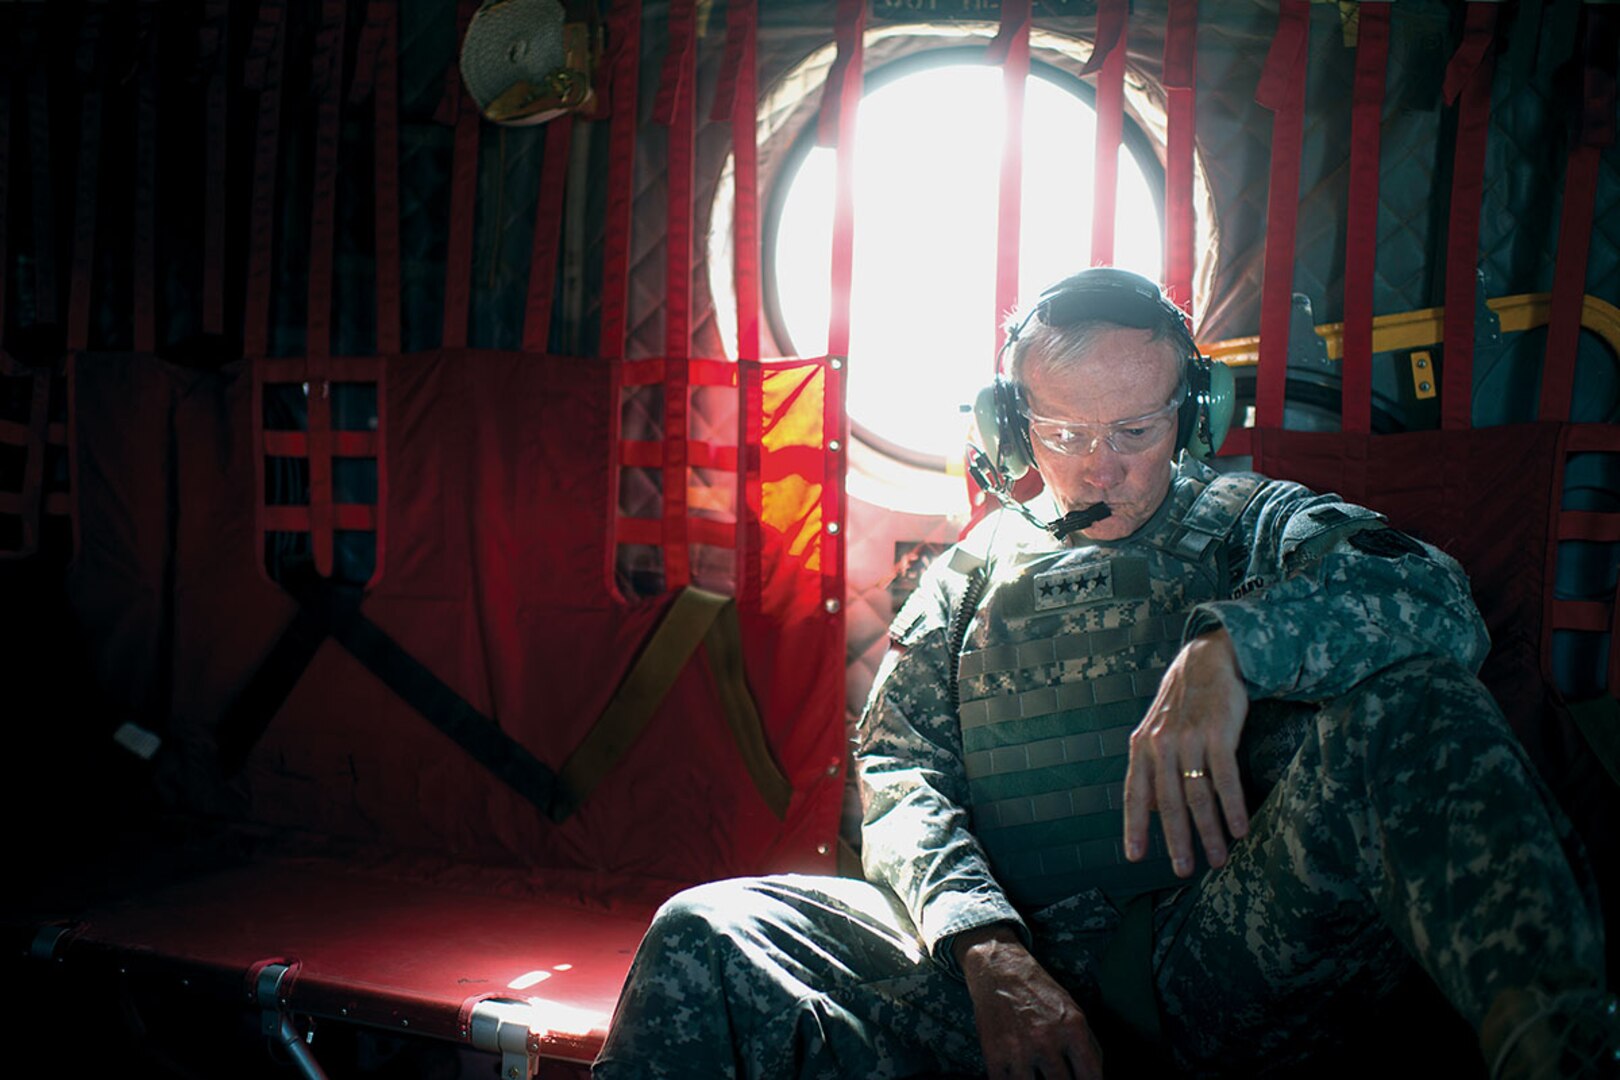 Army Gen. Martin E. Dempsey, chairman of the Joint Chiefs of Staff, aboard a CH-47 traveling from Bagram to Kabul, Afghanistan, for meeting with ISAF, CENTCOM, State Dept. and Afghanistan military leadership Aug. 20, 2012. DOD photo by D. Myles Cullen